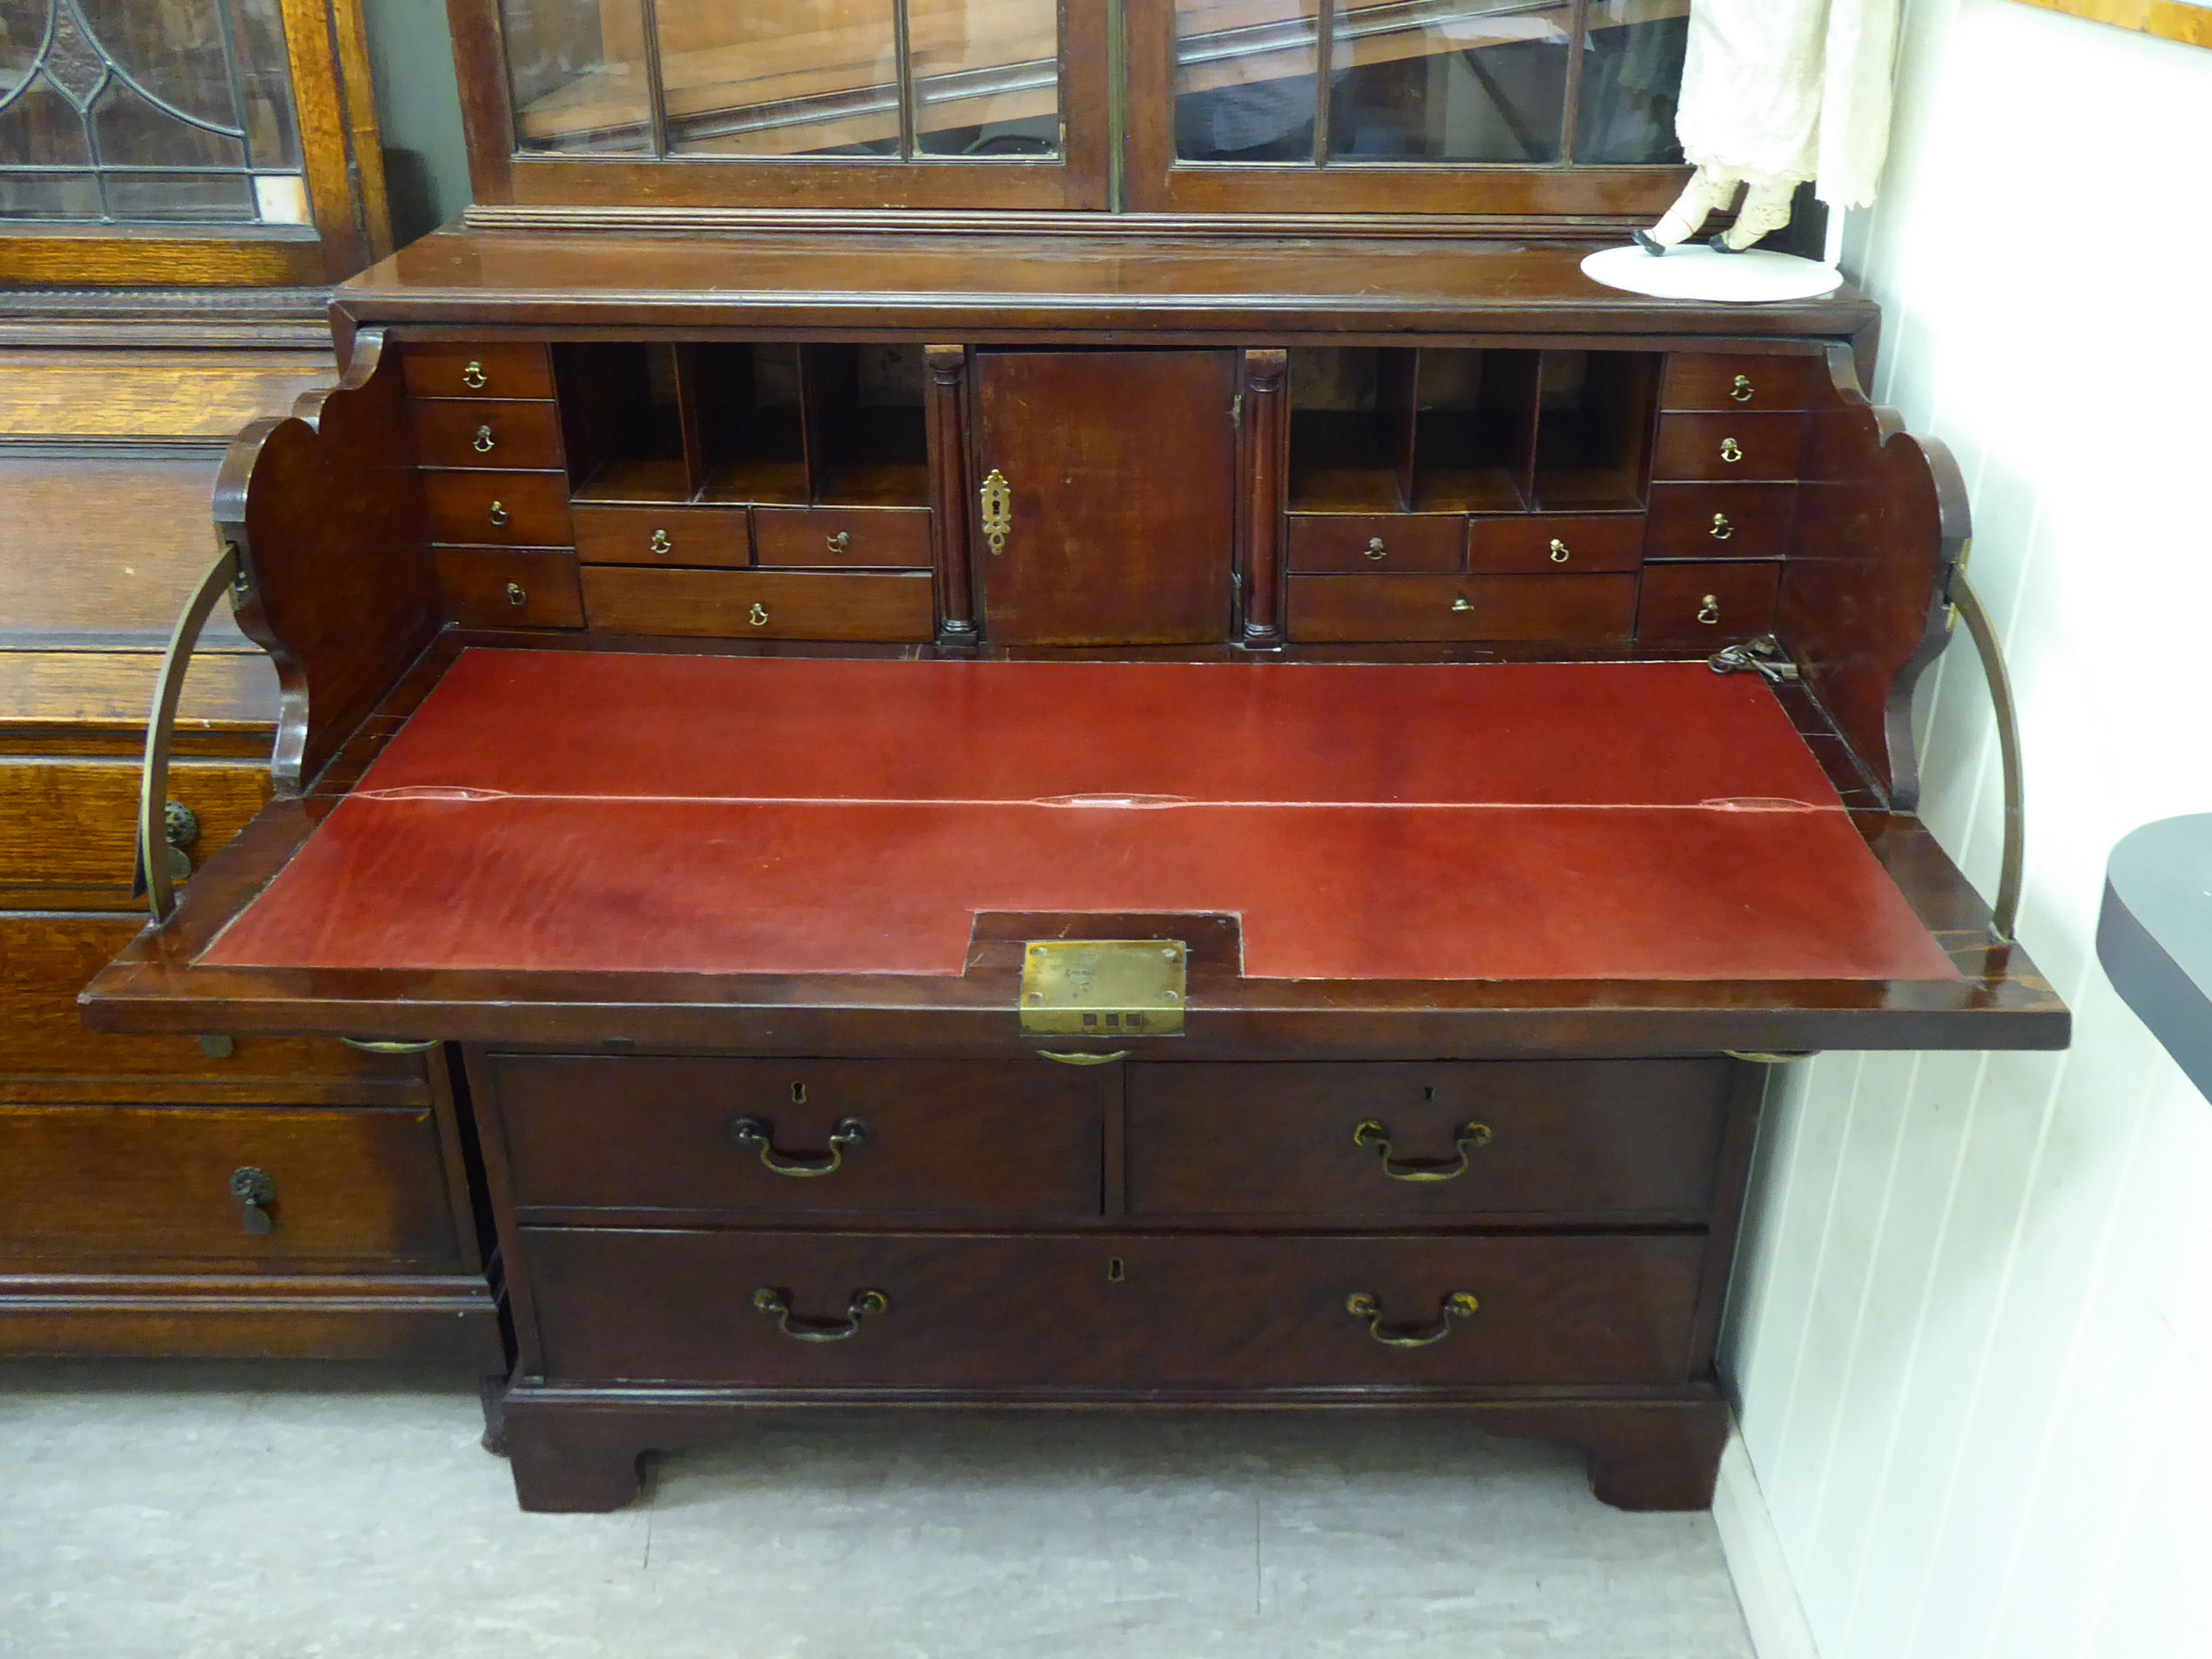 An early 19thC mahogany secretaire bookcase, - Image 2 of 2